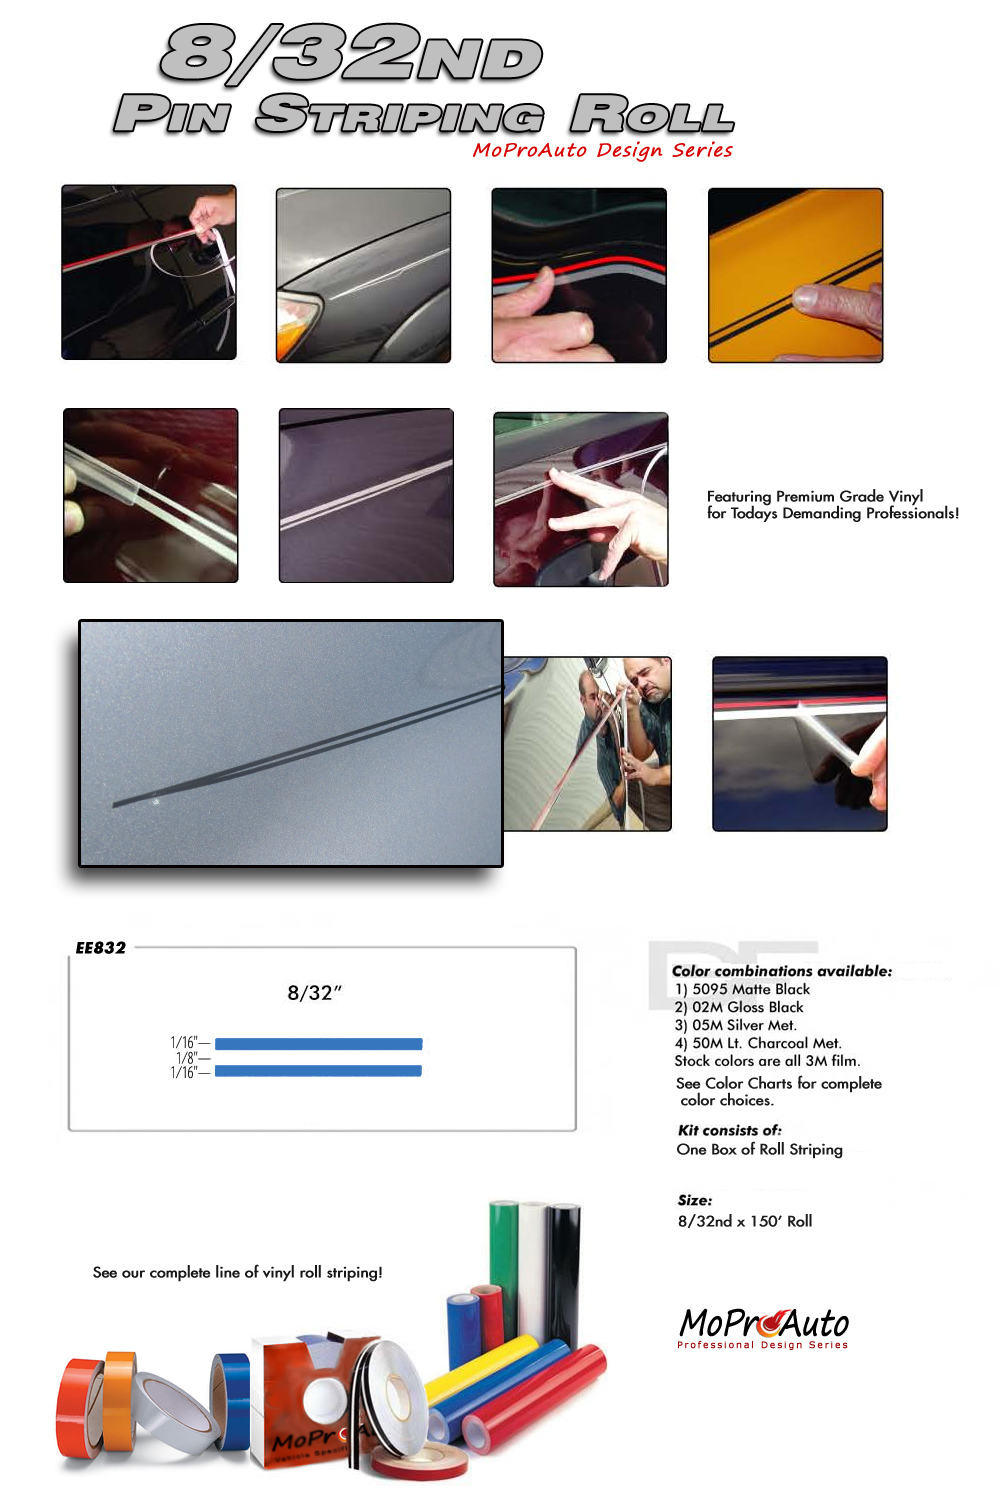 Professional Vinyl Pin Striping Rolls for Automotive Cars and Trucks